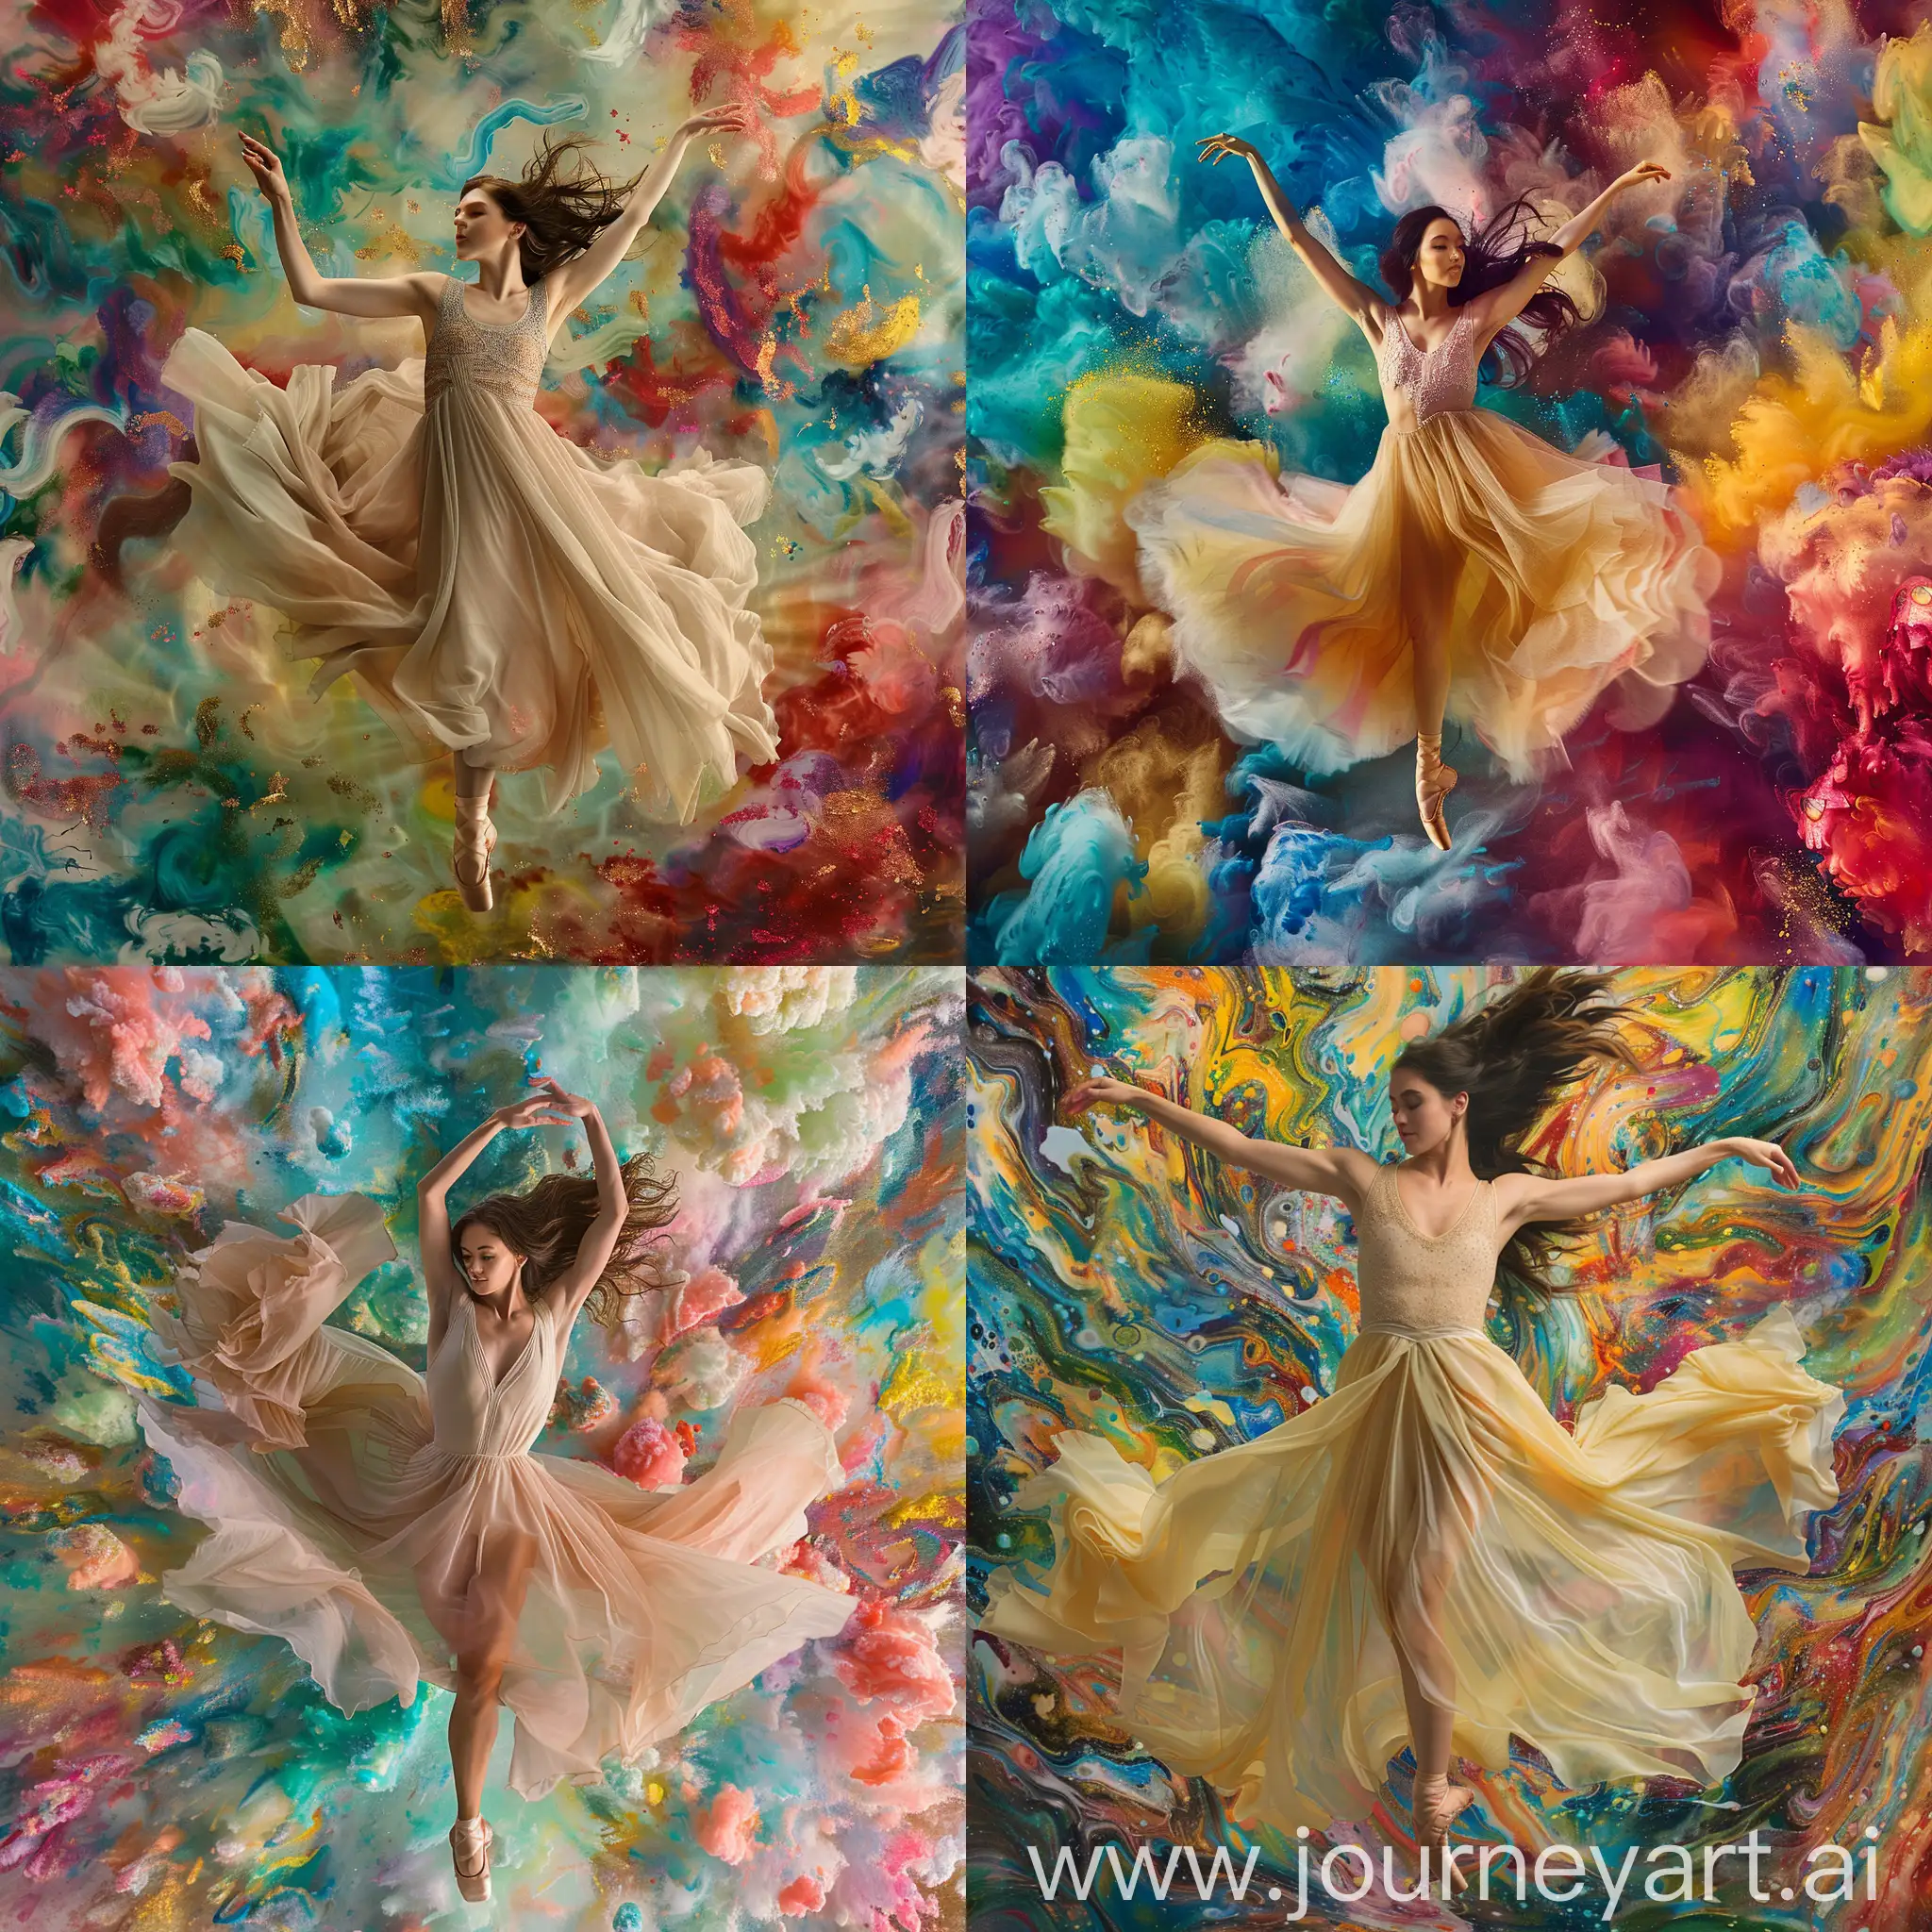 high quality, 8K "A beautiful dancer in a ballet dress". Gracefully twirling amidst a sea of vibrant colors, the ballerina emanates elegance and poise. Her delicate form, adorned in a flowing ballet dress, exudes ethereal beauty. In this exquisite, high-resolution photograph, the dancer appears suspended mid-air, her fluid movements frozen in time. The image showcases the dancer's impeccable technique and refined artistry, capturing the essence of her mesmerizing performance.